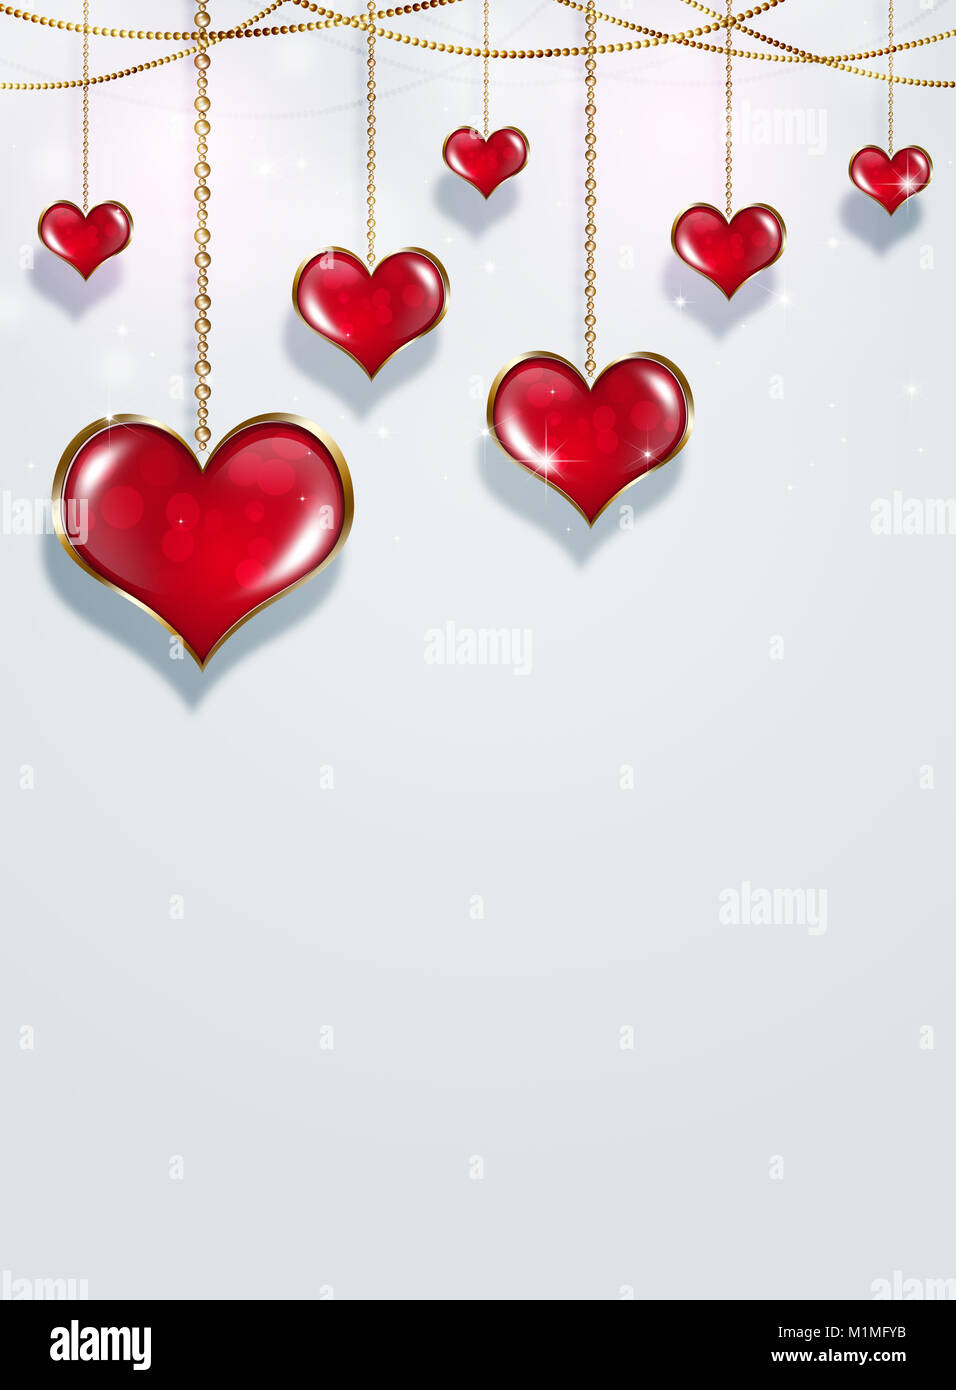 valentine holiday bright background with red hearts and lights Stock Photo